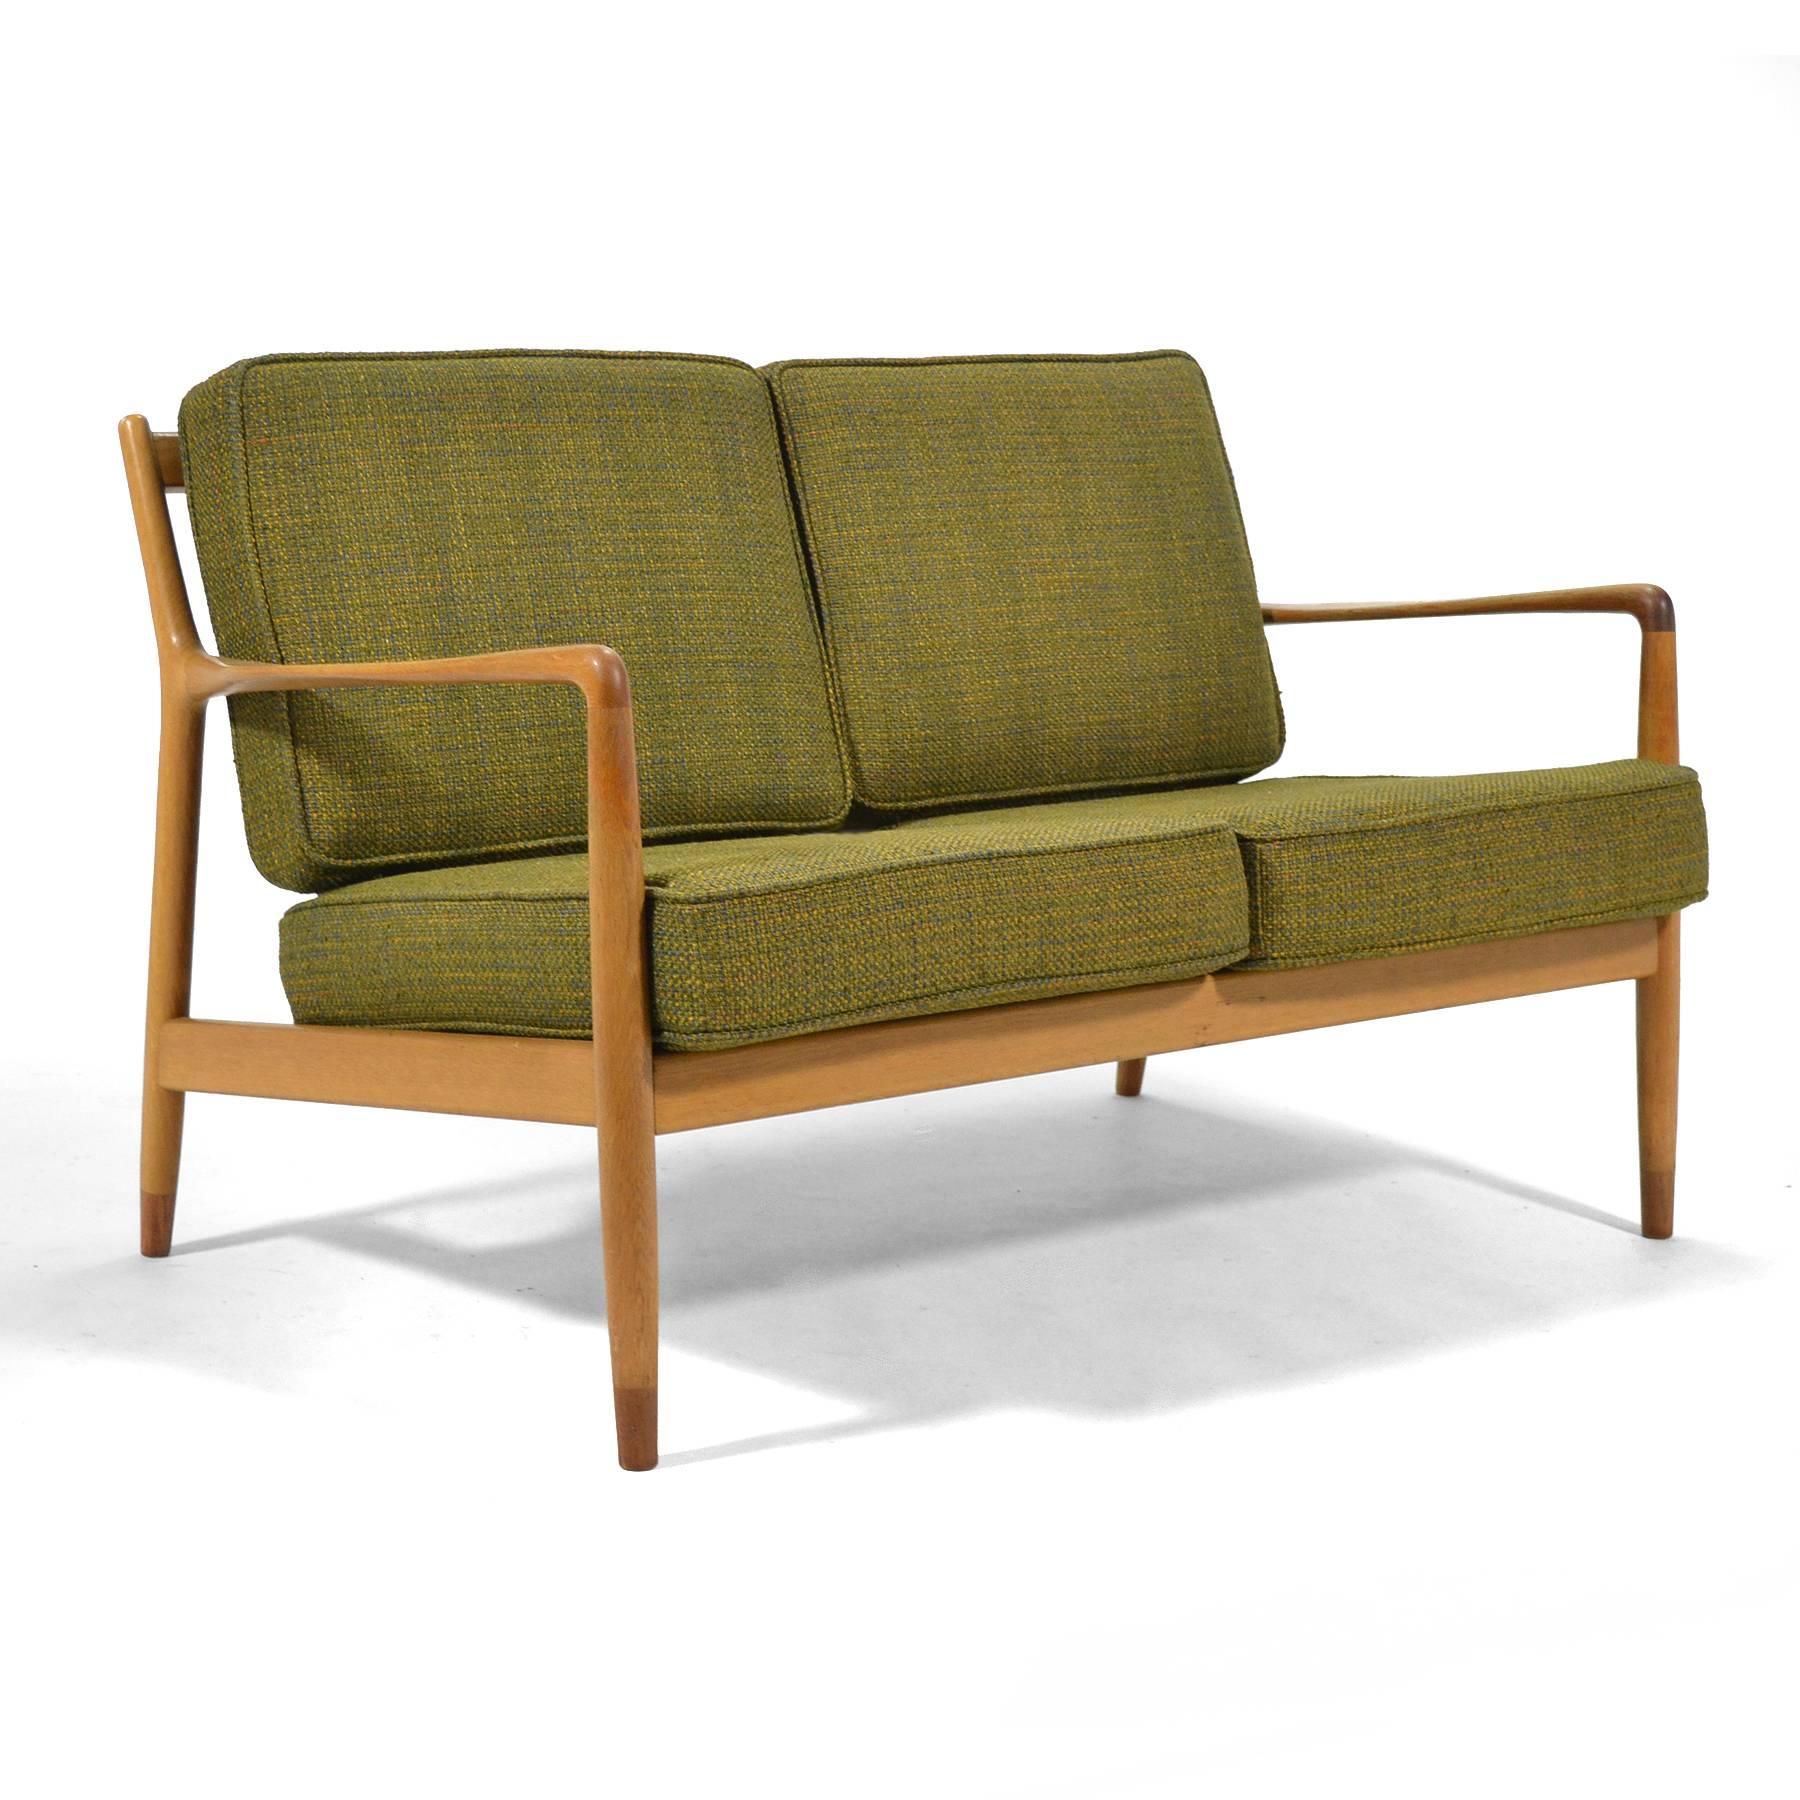 This beautiful early Folke Ohlsson two-seat sofa by DUX was crafted of solid oak with teak feet and an exquisite woven wool fabric. The original upholstery has been cleaned and restored with brand new foam.

 

 